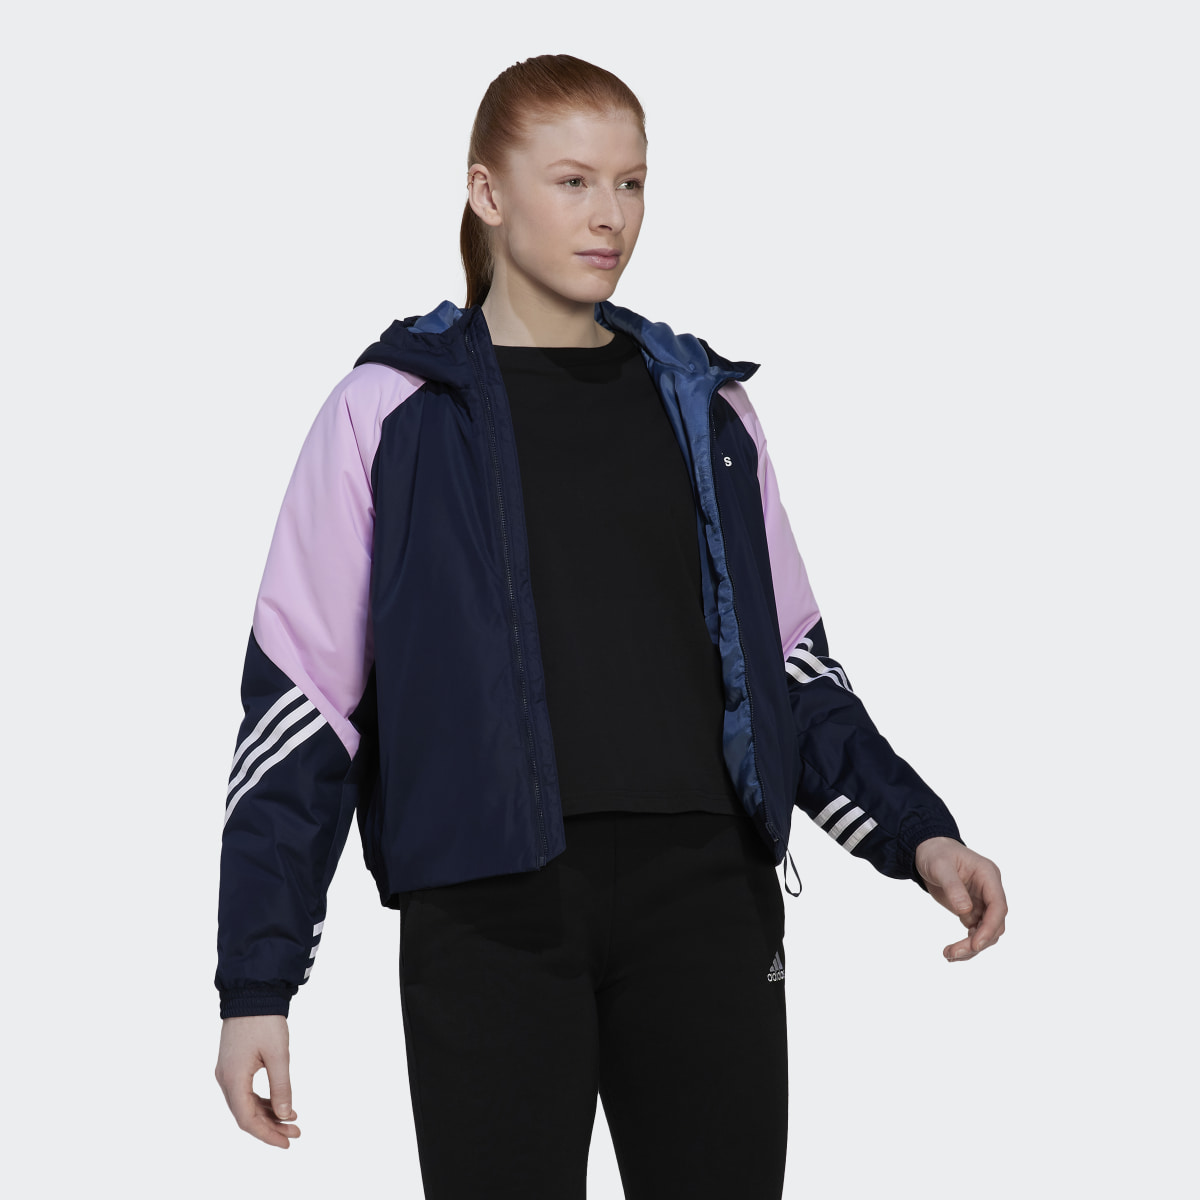 Adidas Back to Sport Hooded Jacket. 5